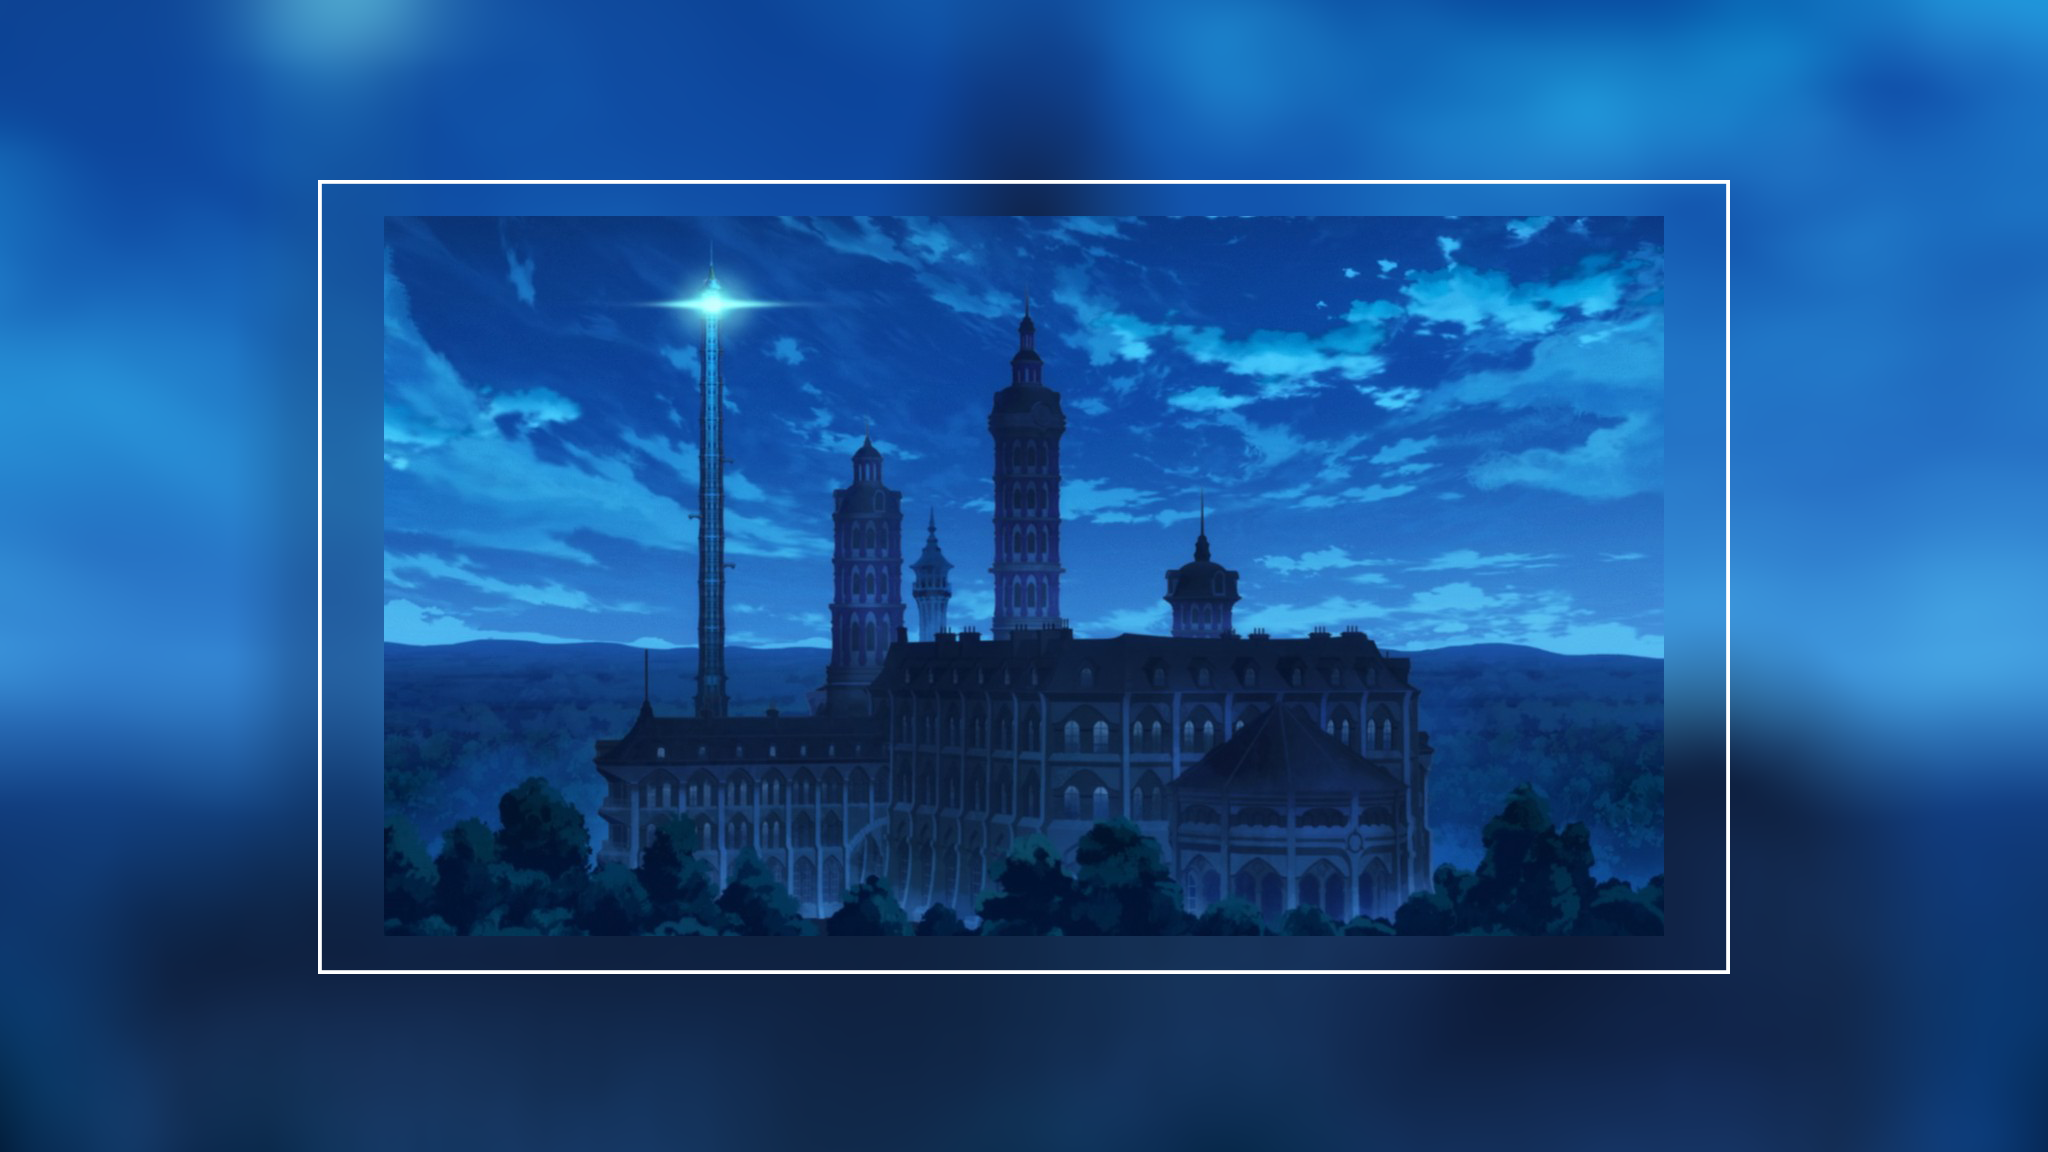 Anime 2048x1152 anime landscape castle Little Witch Academia blurred night Anime screenshot